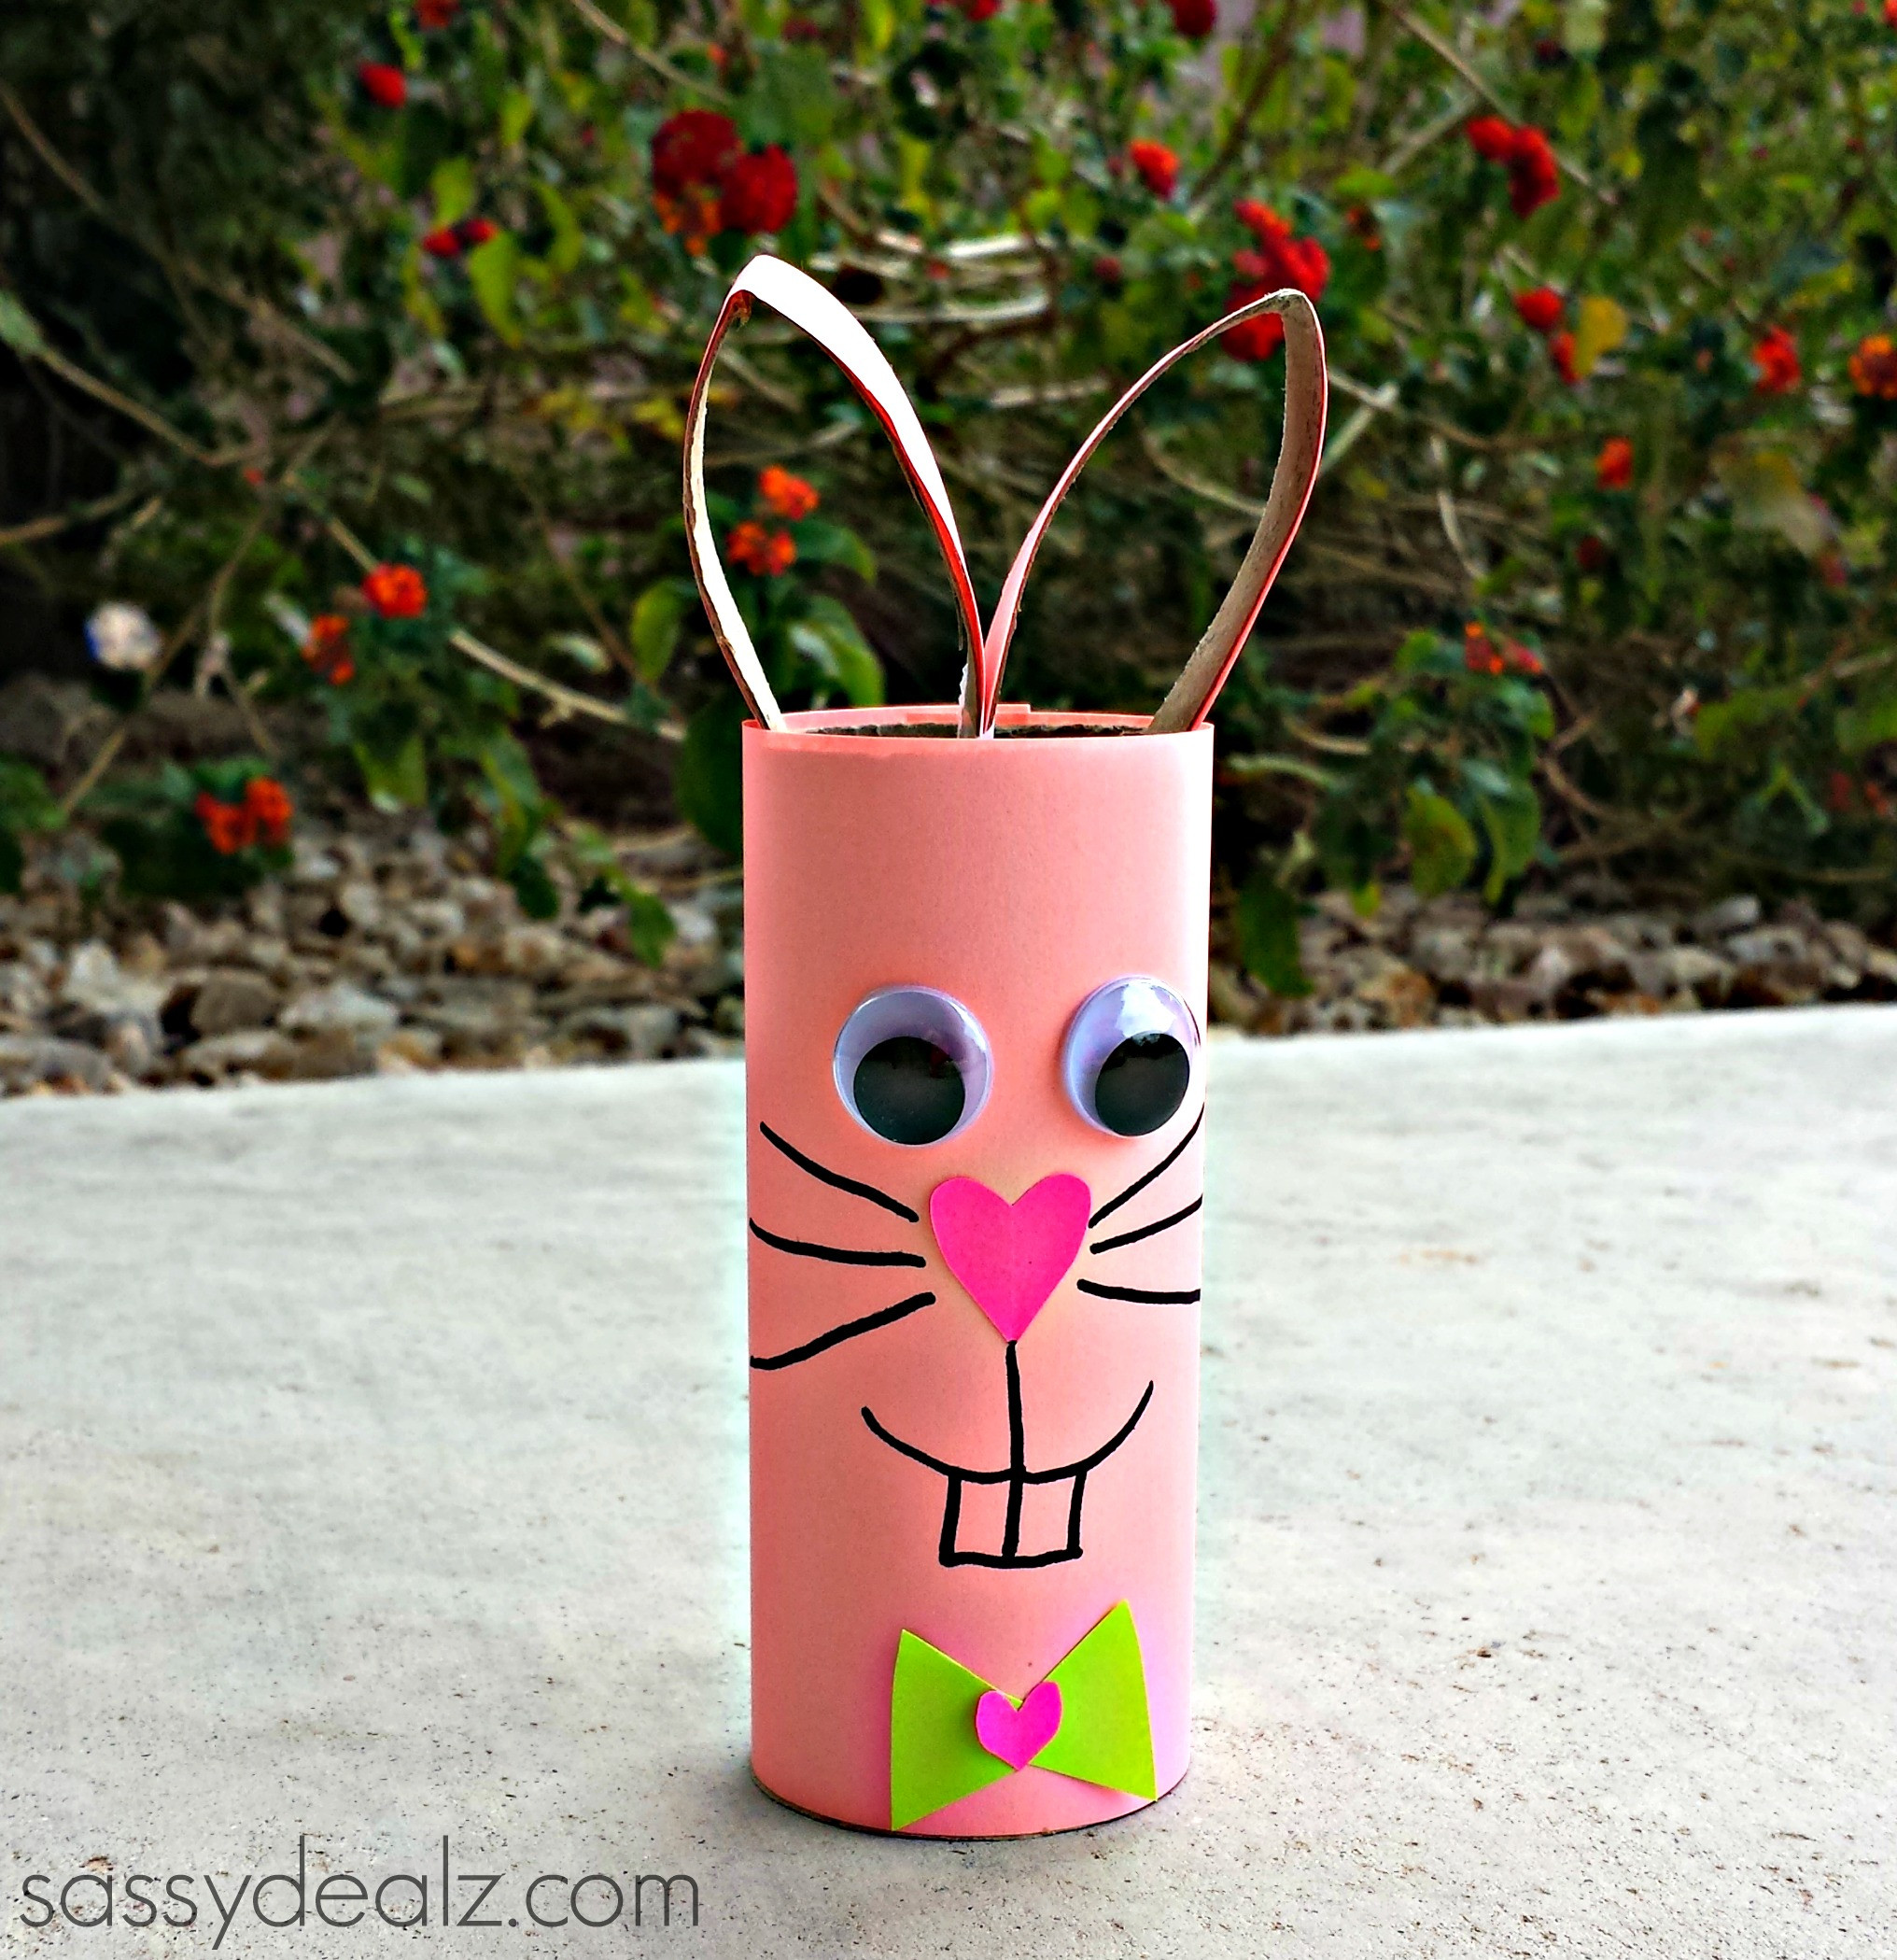 Toilet Paper Roll Easter Crafts
 Bunny Rabbit Toilet Paper Roll Craft For Kids Crafty Morning